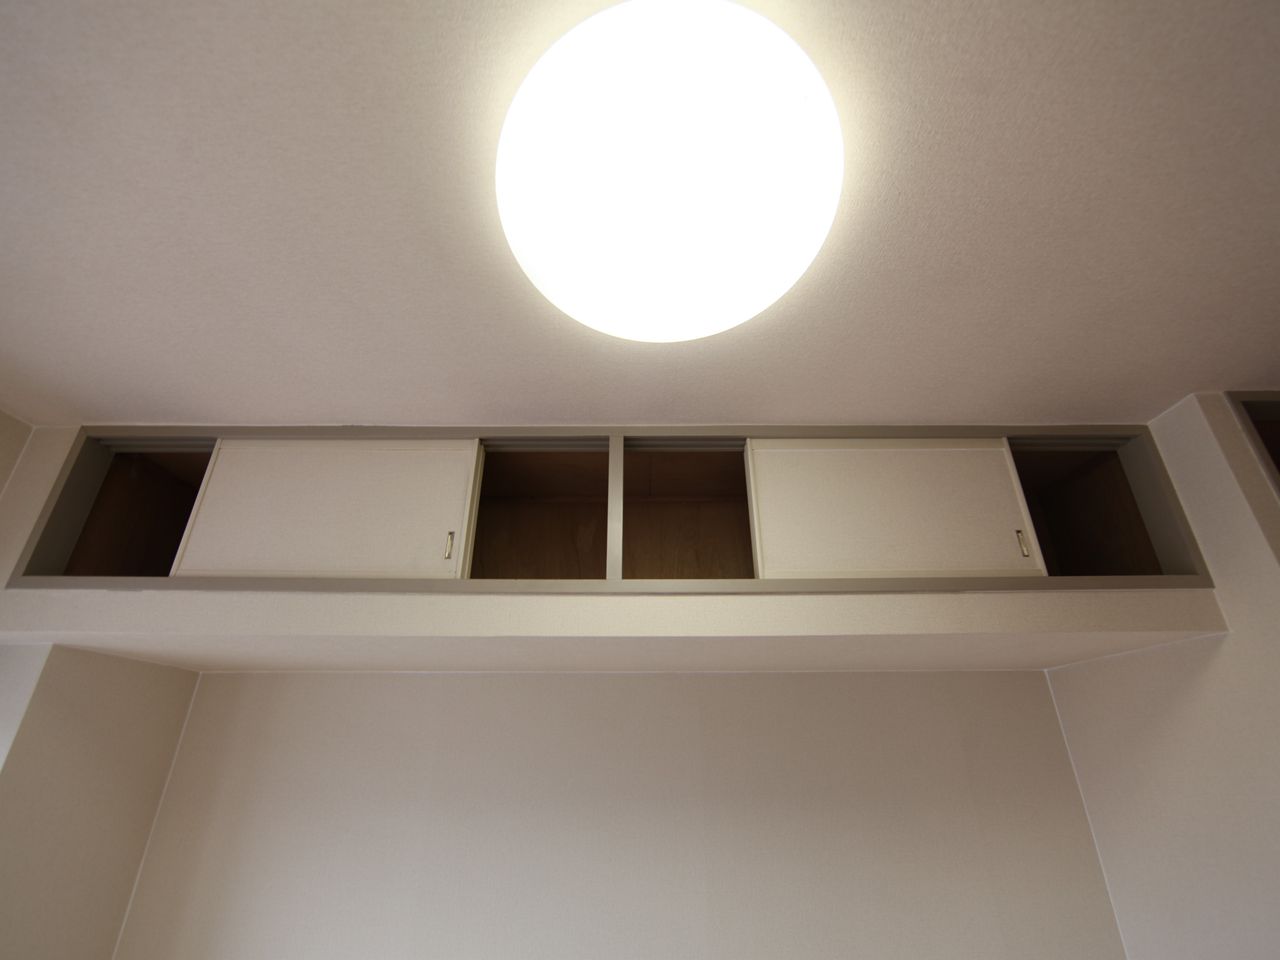 Other. With in-room lighting With ceiling shelves